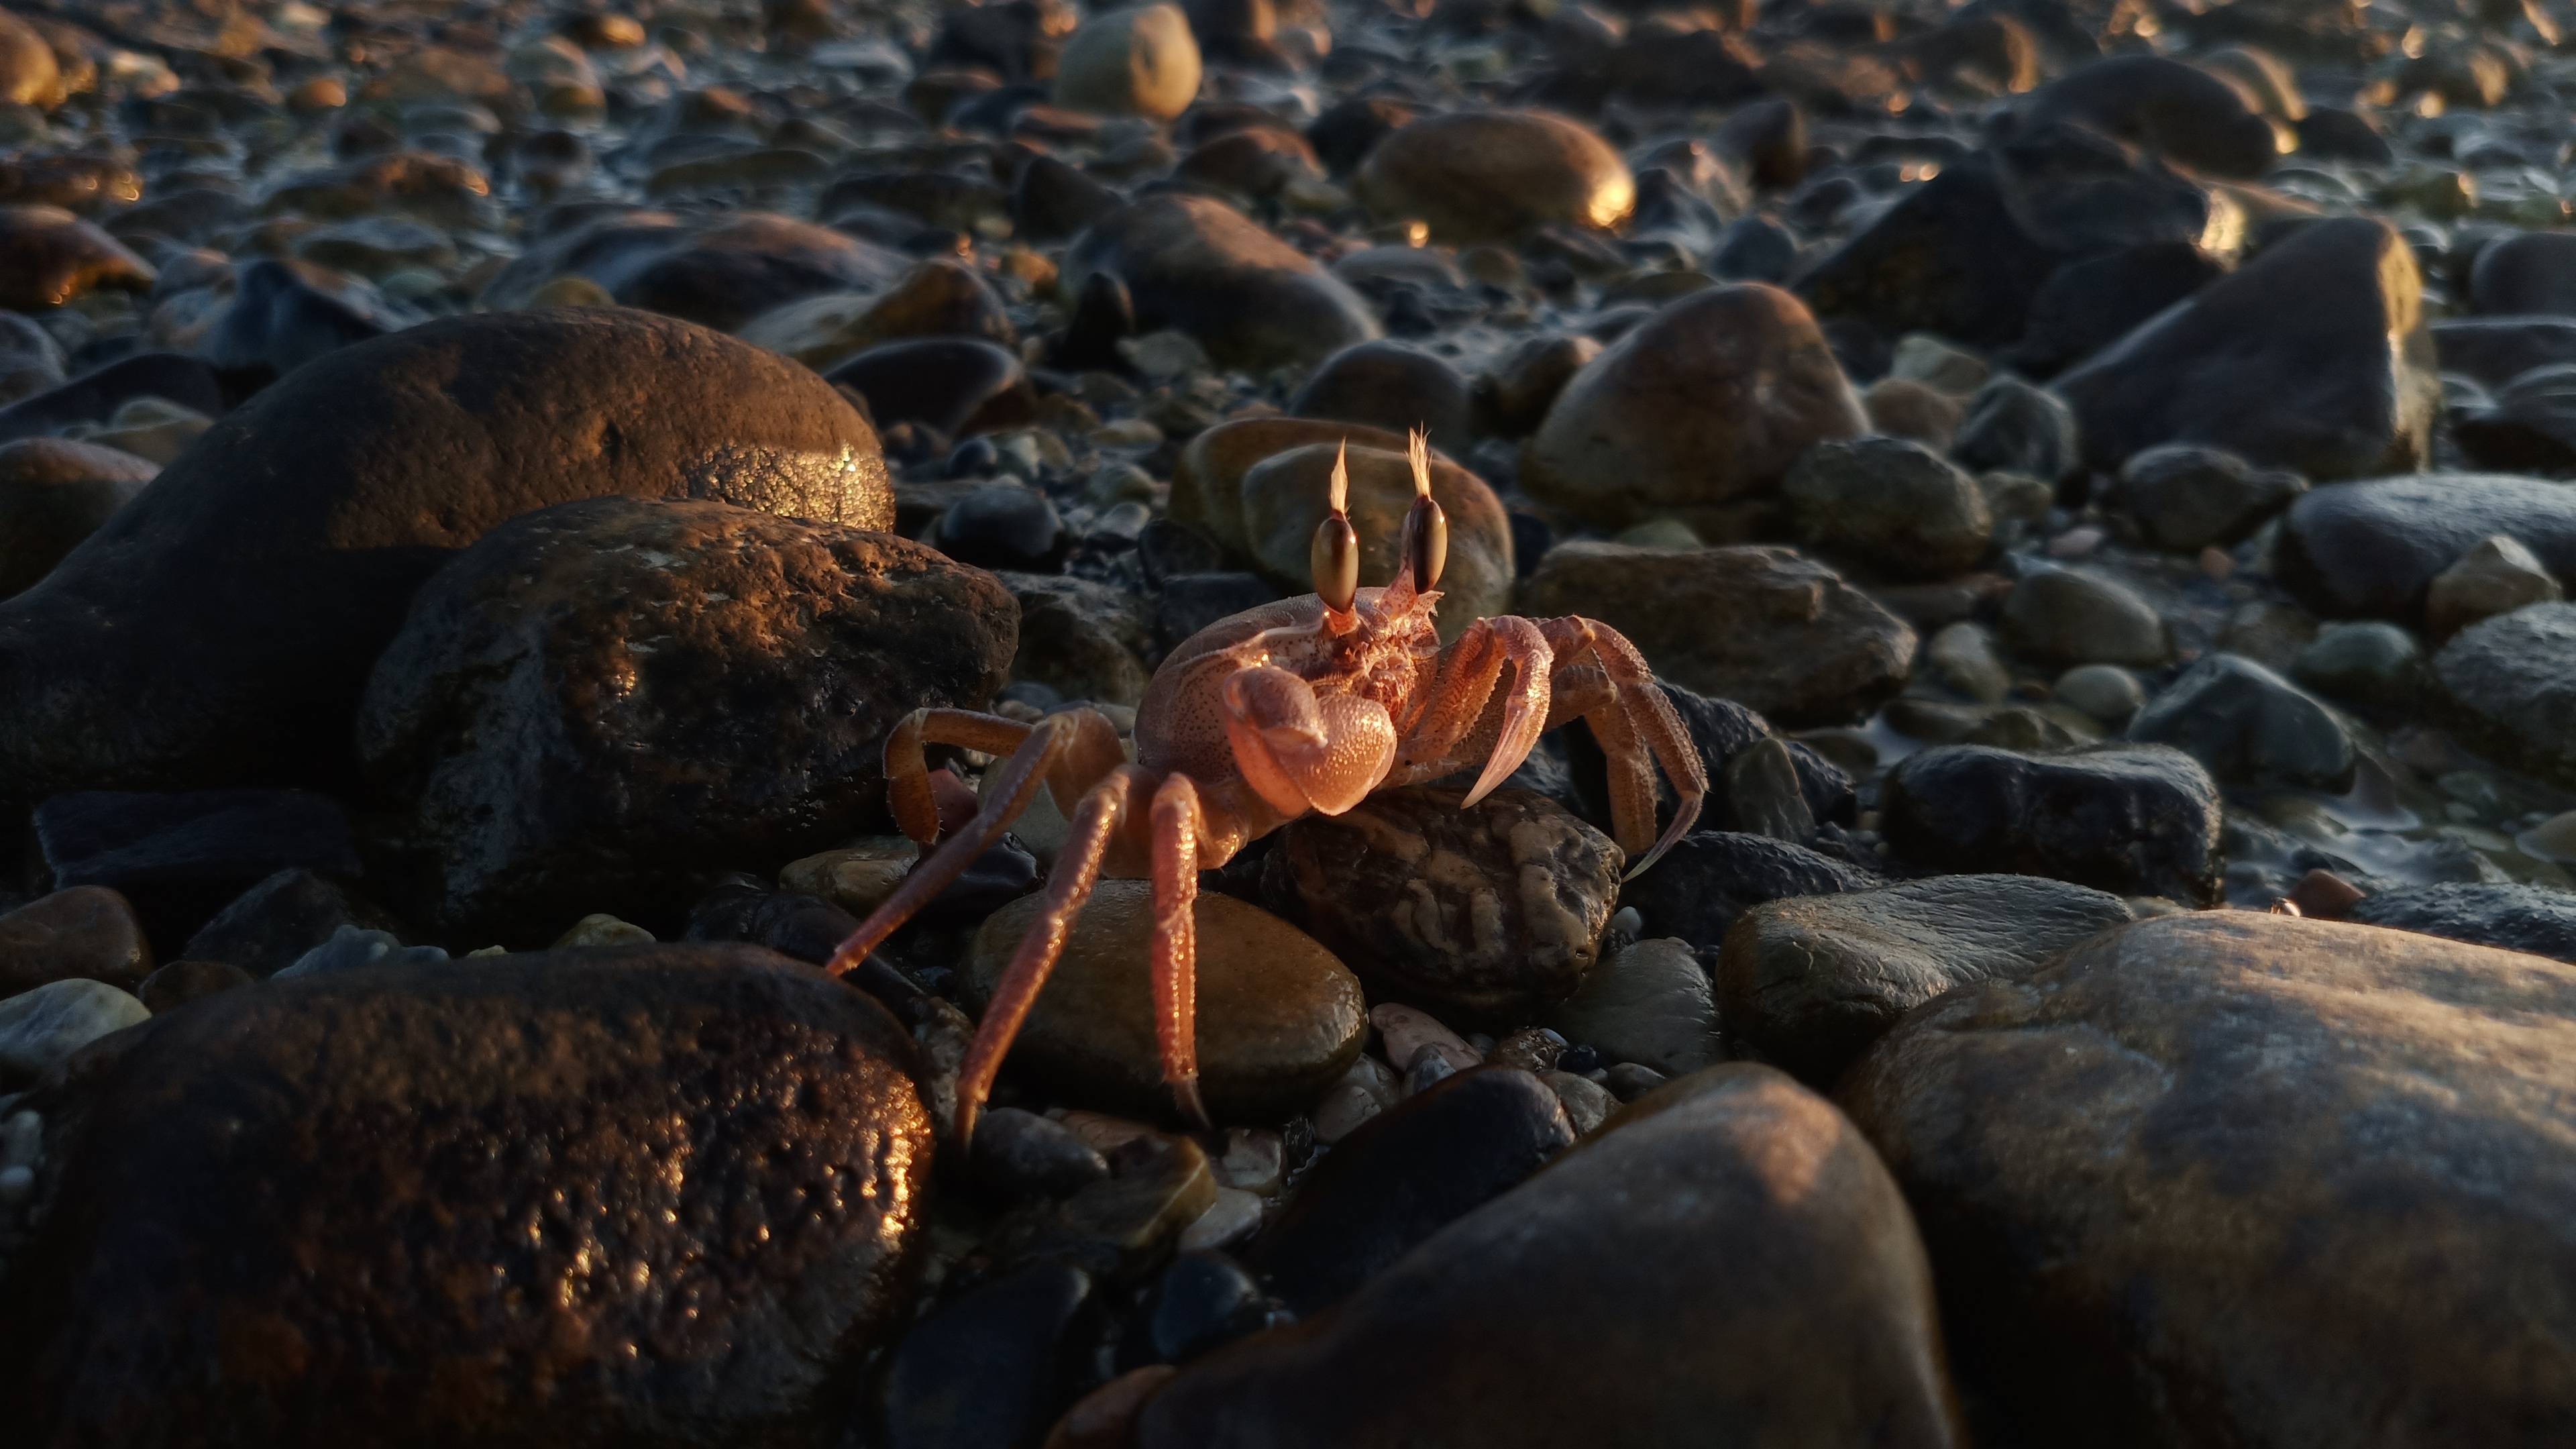 Crab: Red and gold animal with exoskeleton on rock. 3840x2160 4K Wallpaper.